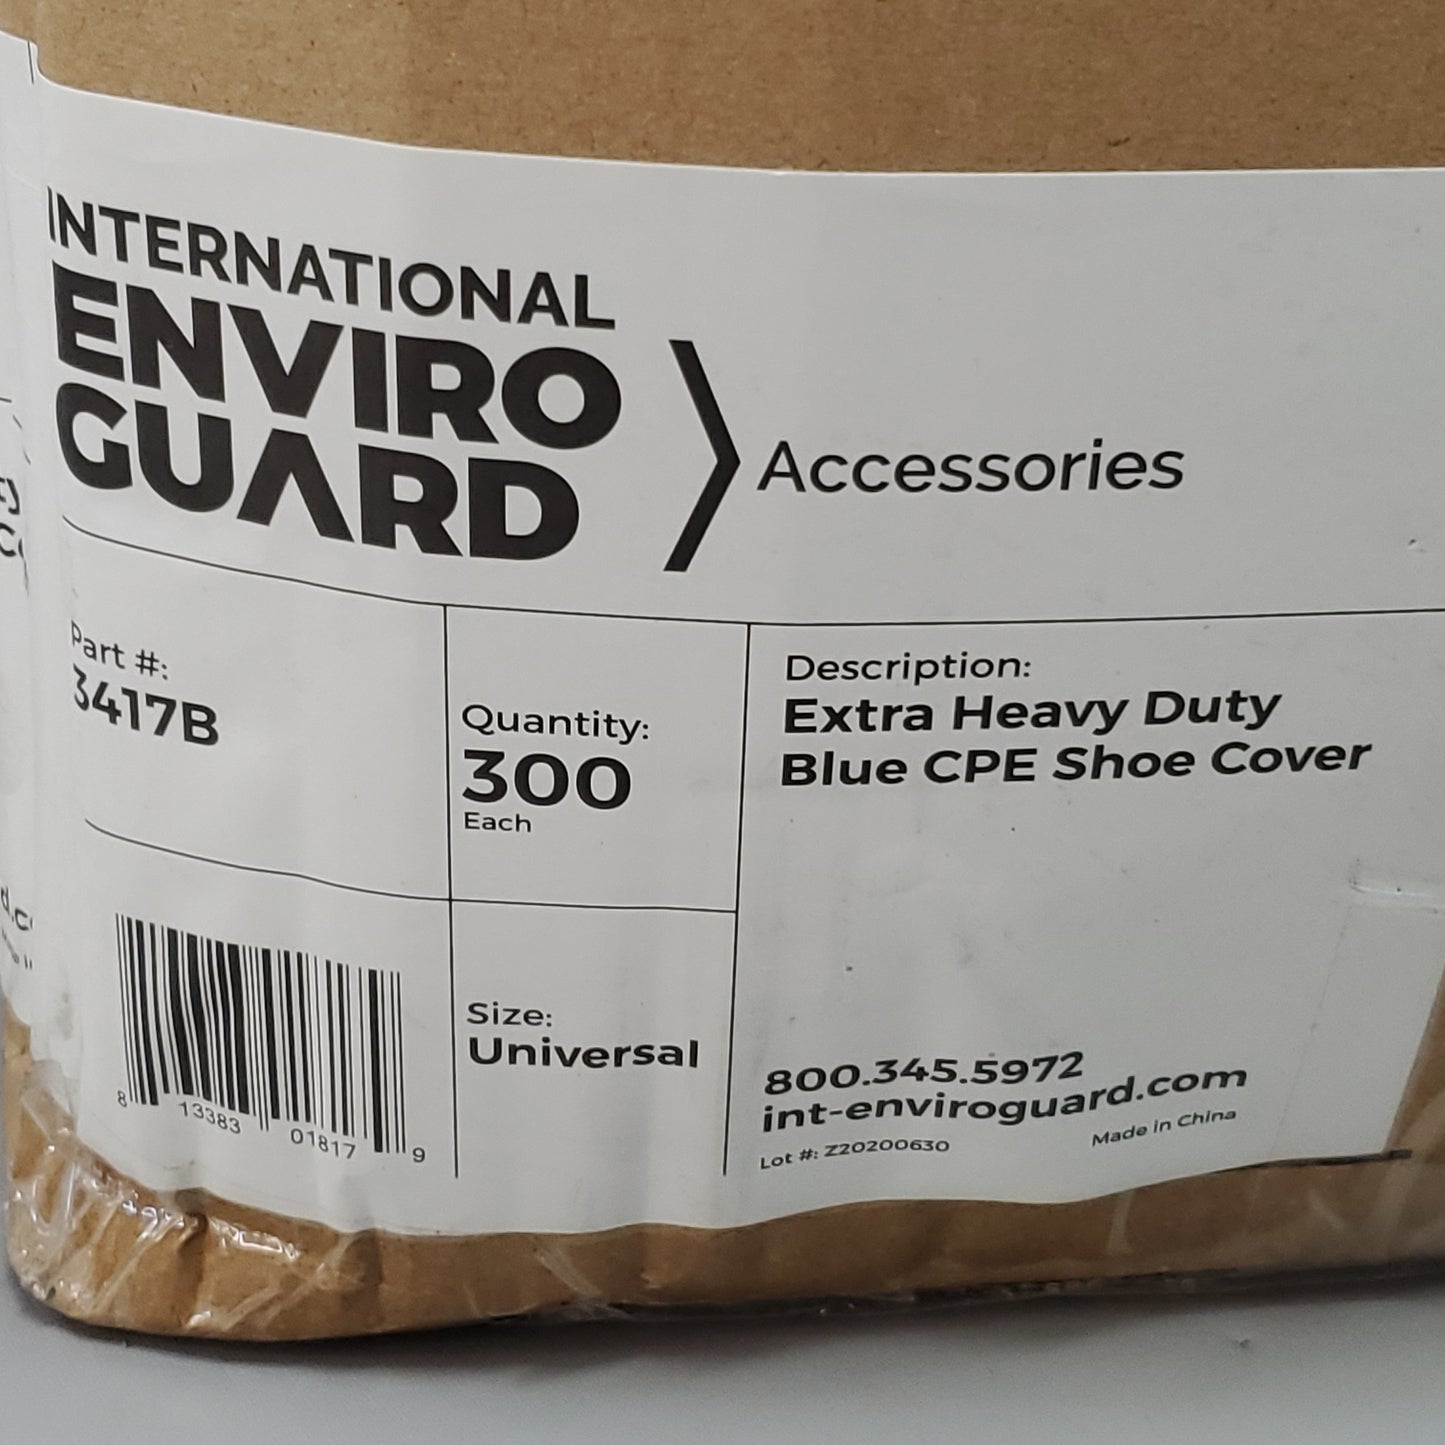 INTERNATIONAL ENVIRO GUARD Extra Heavy Duty Blue CPE Shoe Cover #3417B (New Other)